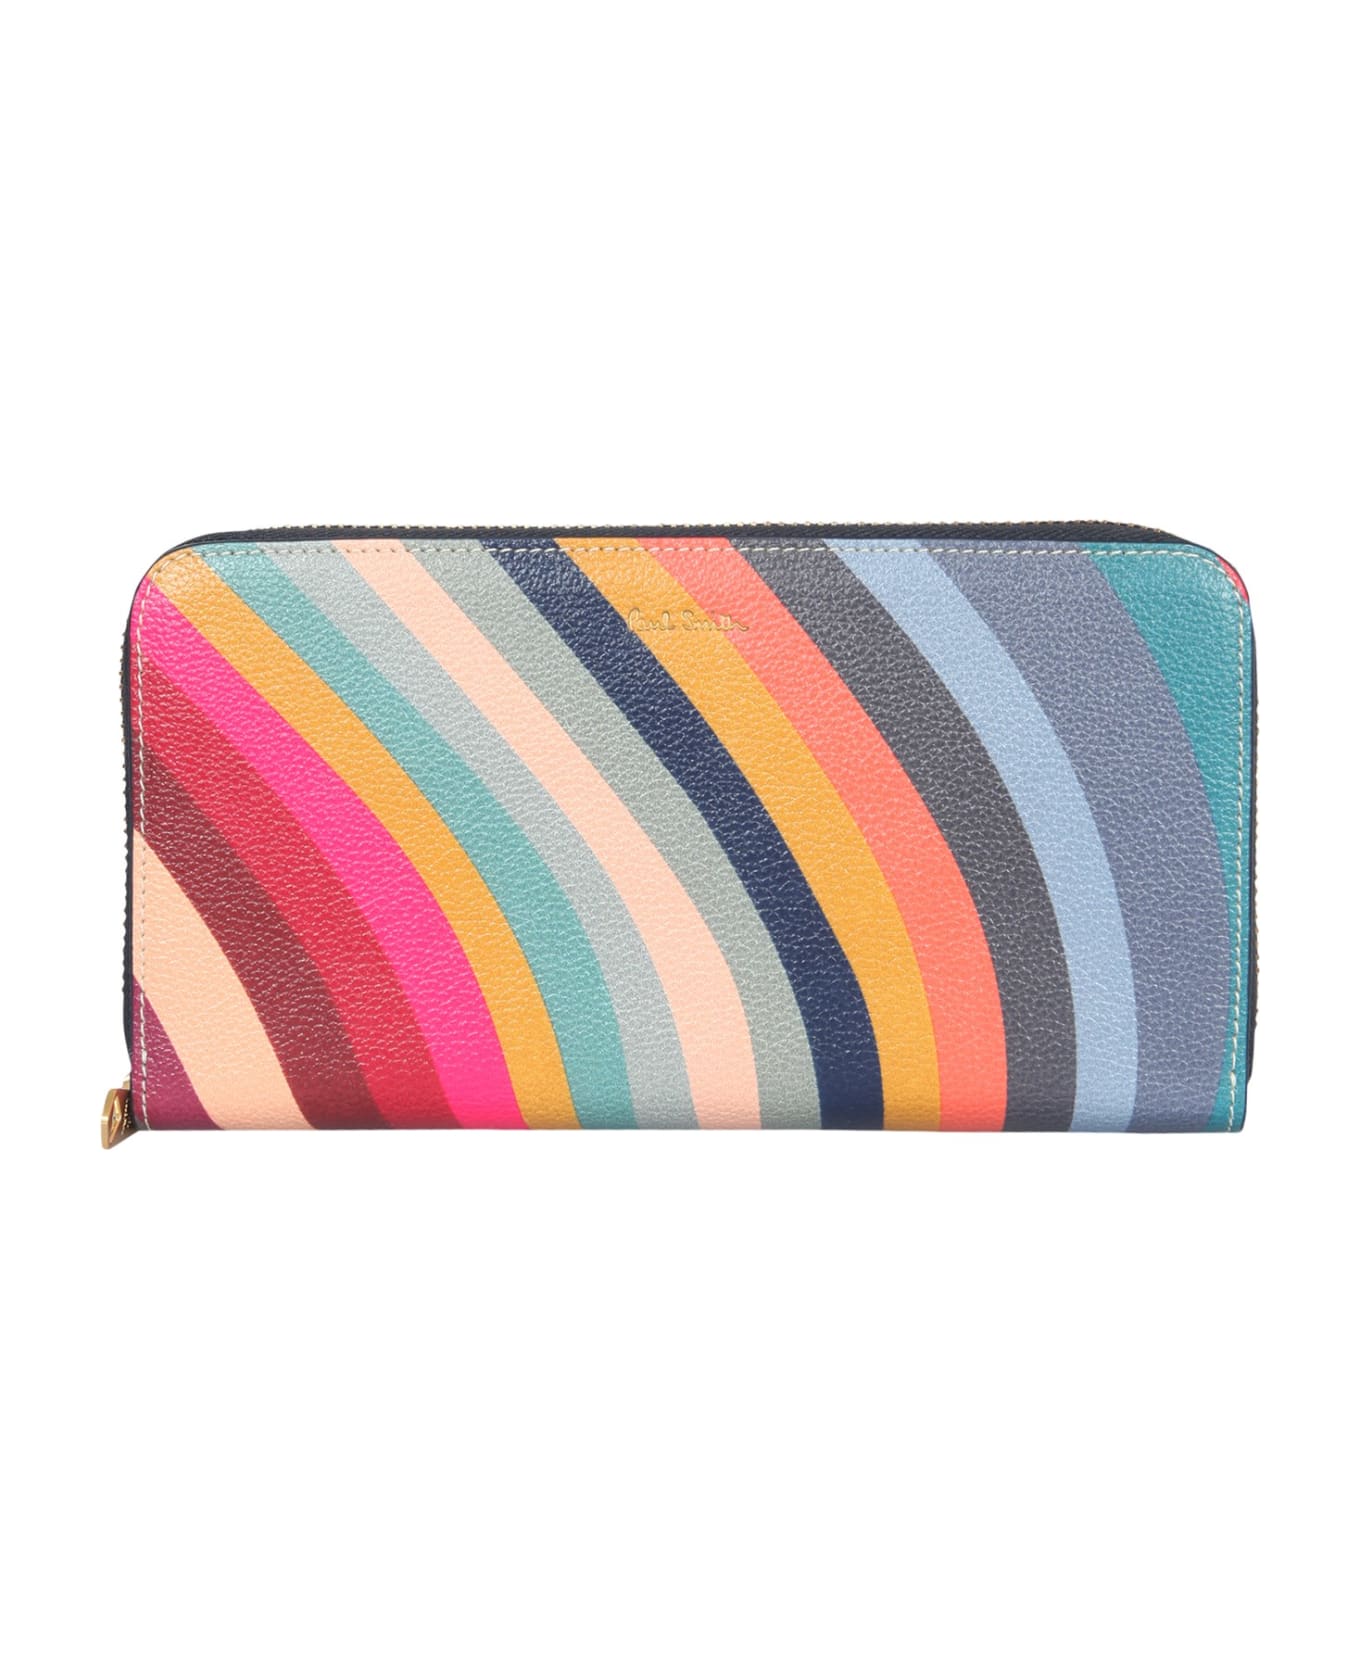 Paul Smith Large Wallet With Zip - Multicolor 財布